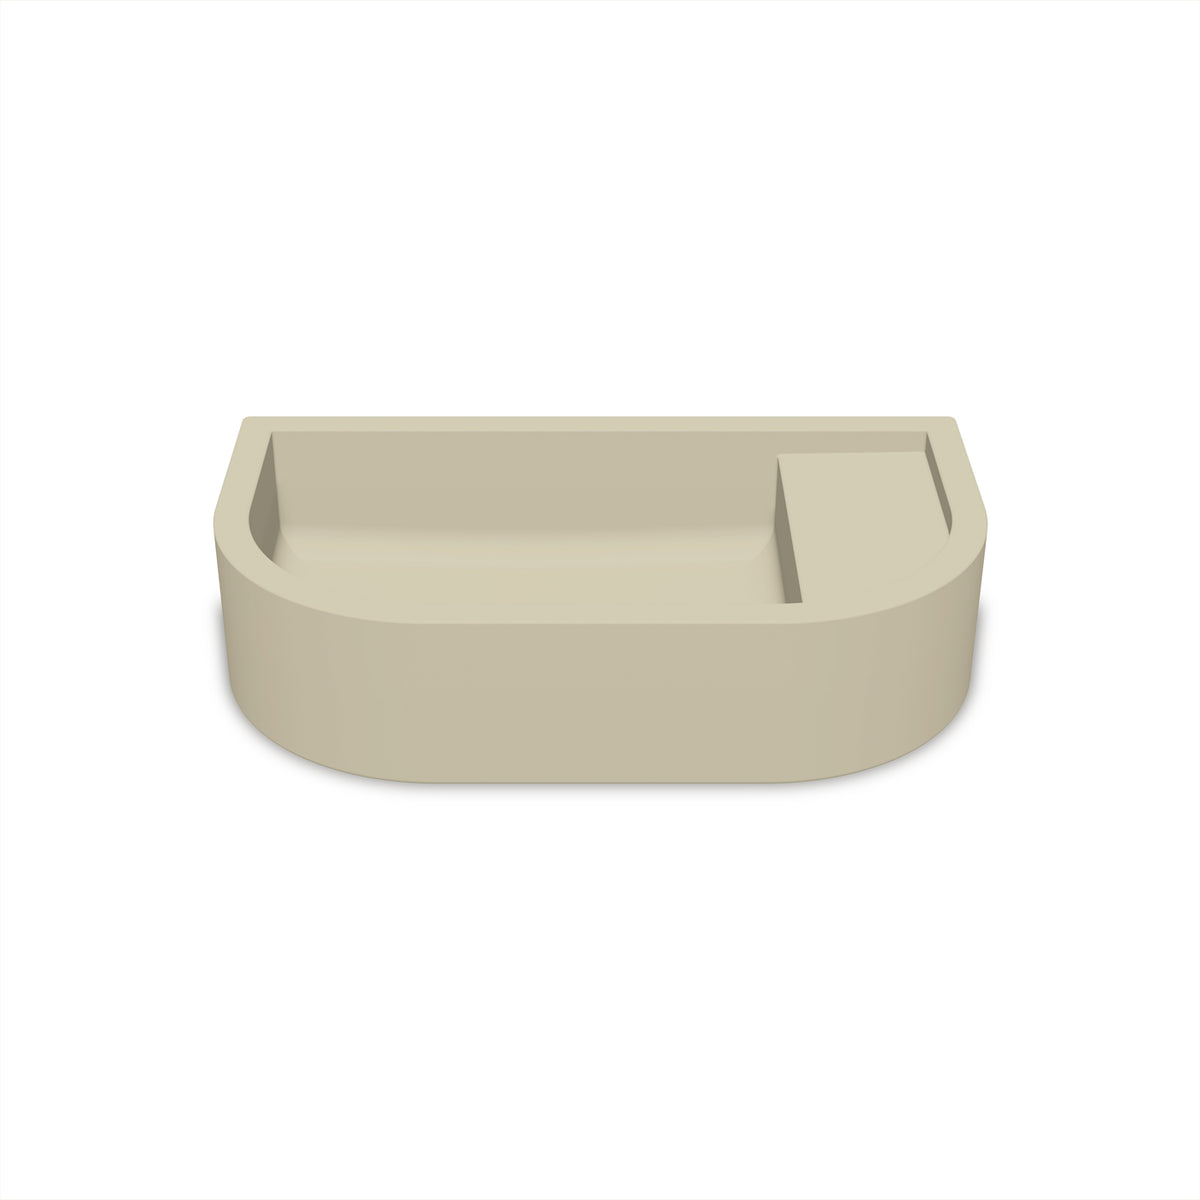 Loop 02 Basin - Overflow - Wall Hung (Sand,No Tap Hole,White)